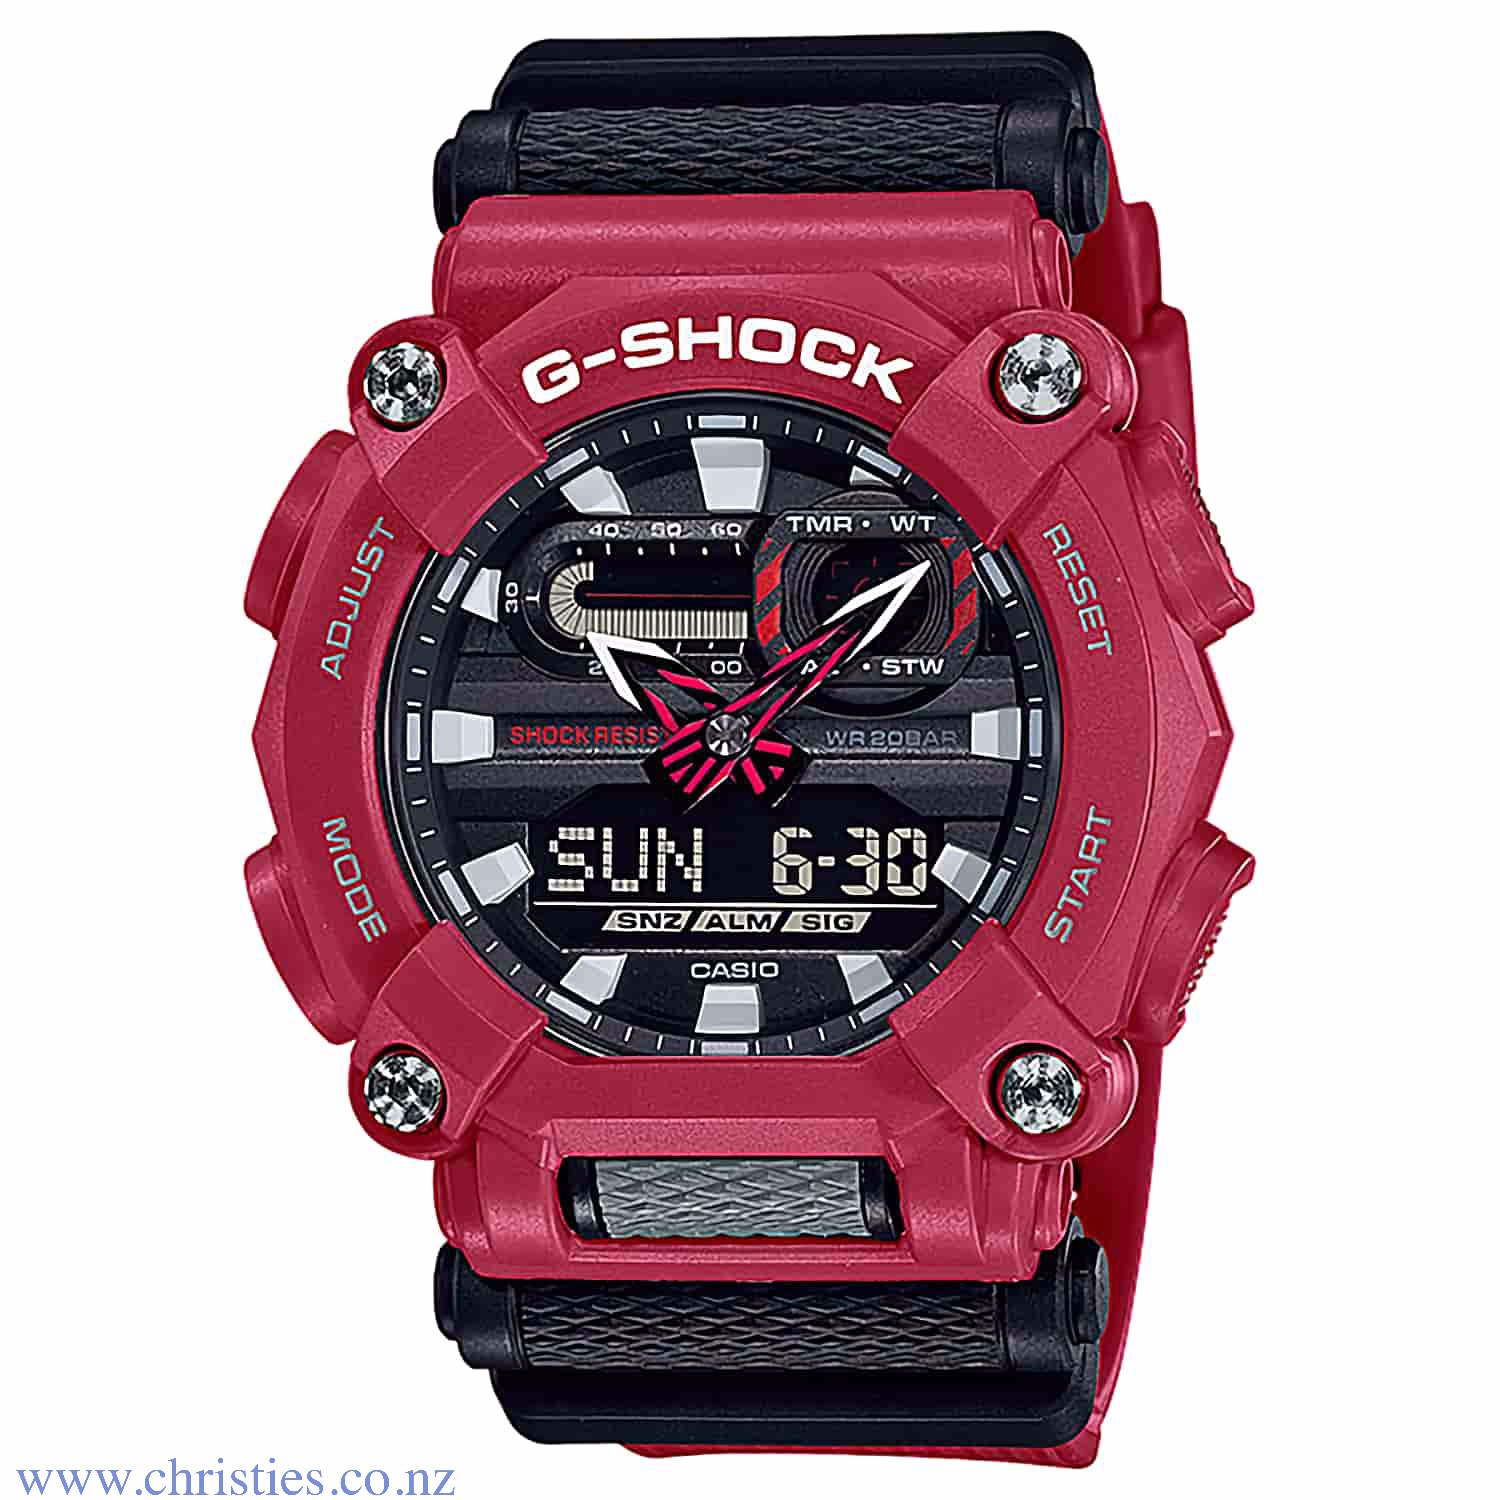 GA900-4A Casio G-Shock  Heavy Duty Watch. G-SHOCK announces more colour options in the  heavy-duty GA900 series, that is great for wear in tough environments and as street fashion items as well. The industrial design motif of this model is created by a G-